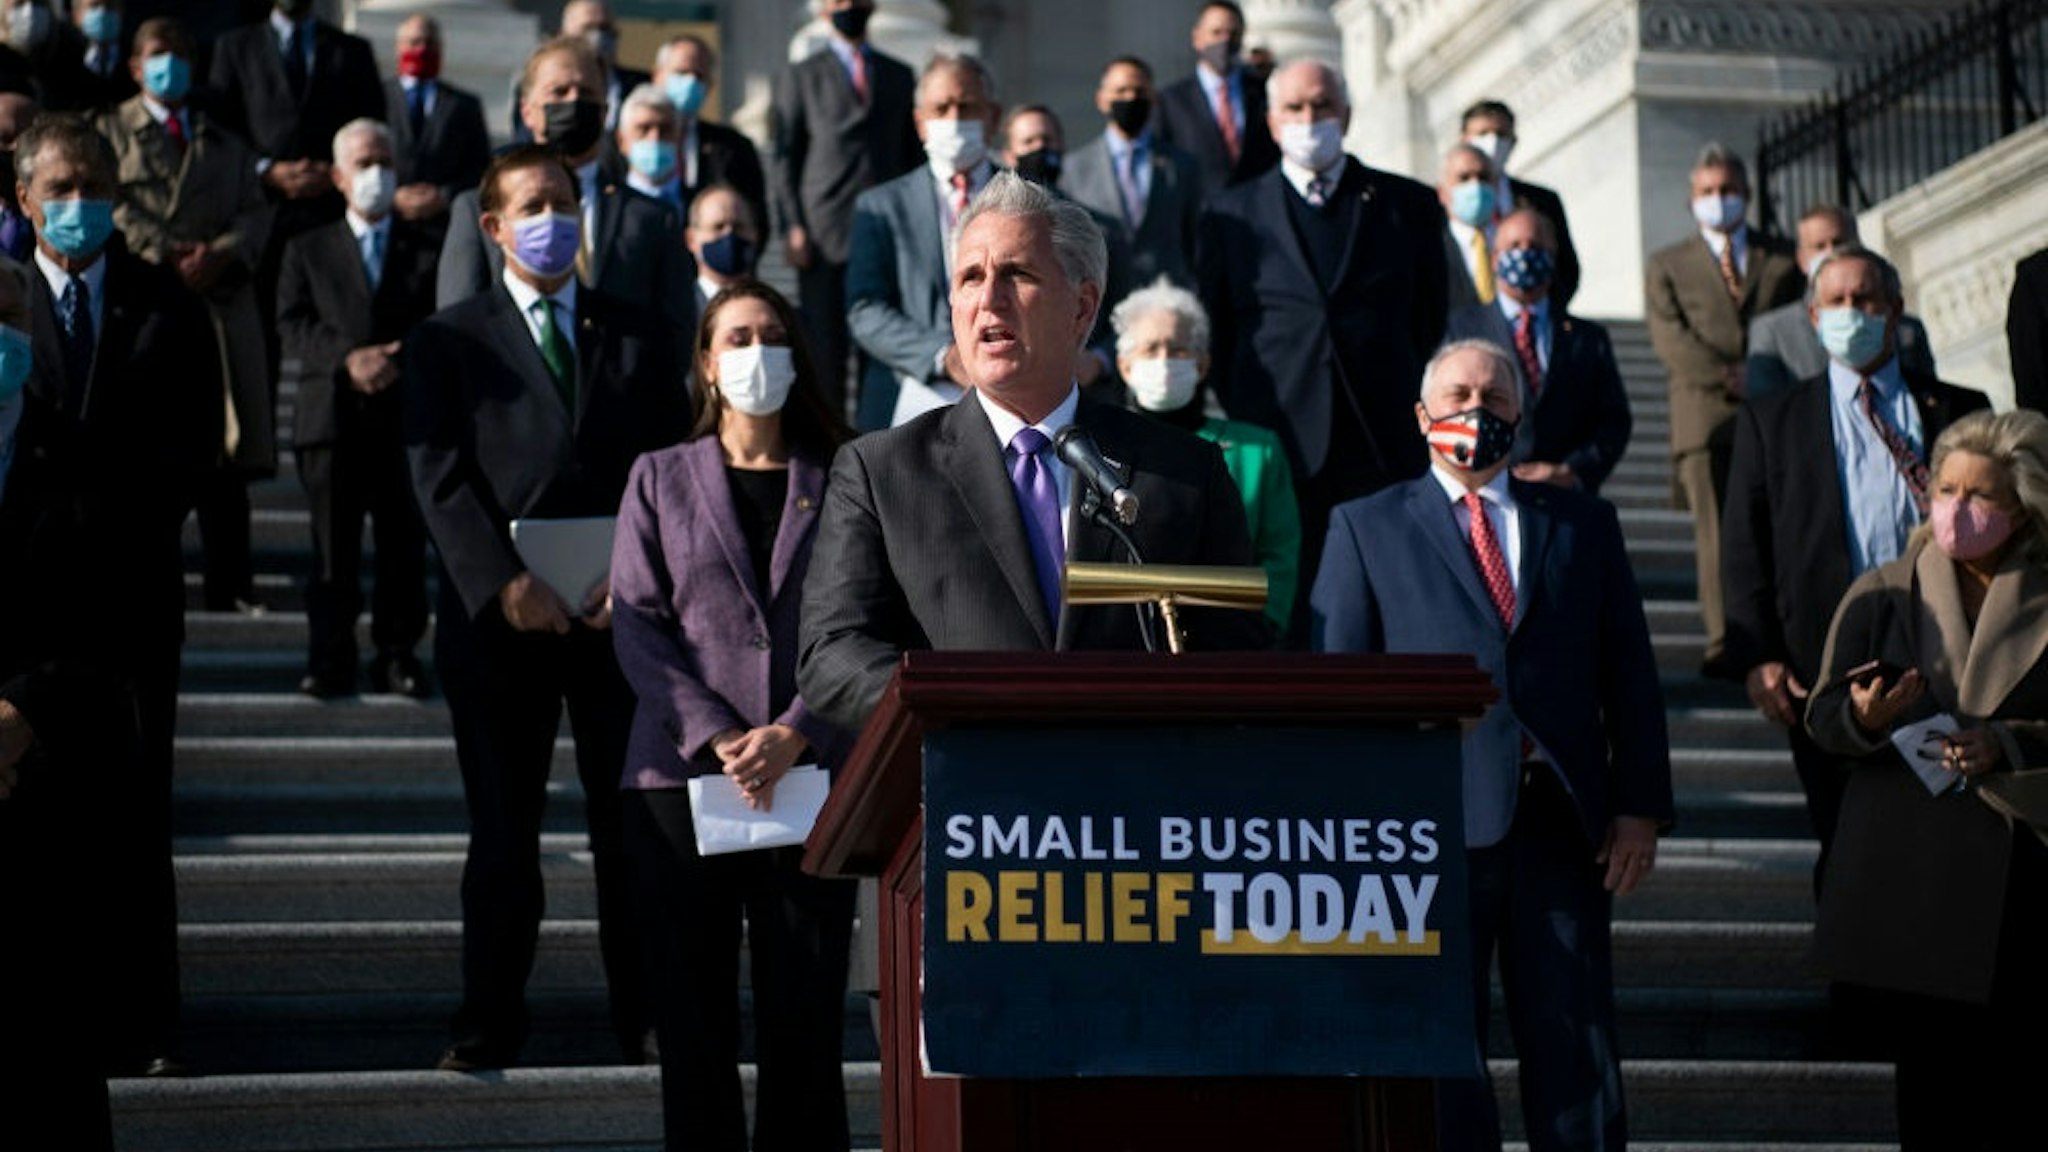 UNITED STATES - December 10: House Minority Leader Kevin McCarthy, R-Calif., joined by other House Republicans, speaks during a news conference on the House steps in Washington on Thursday, Dec. 10, 2020. McCarthy and House Republicans discussed their desire to extend the Paycheck Protection Program and provide relief for small business owners and their employees who have been affected by the coronavirus pandemic.